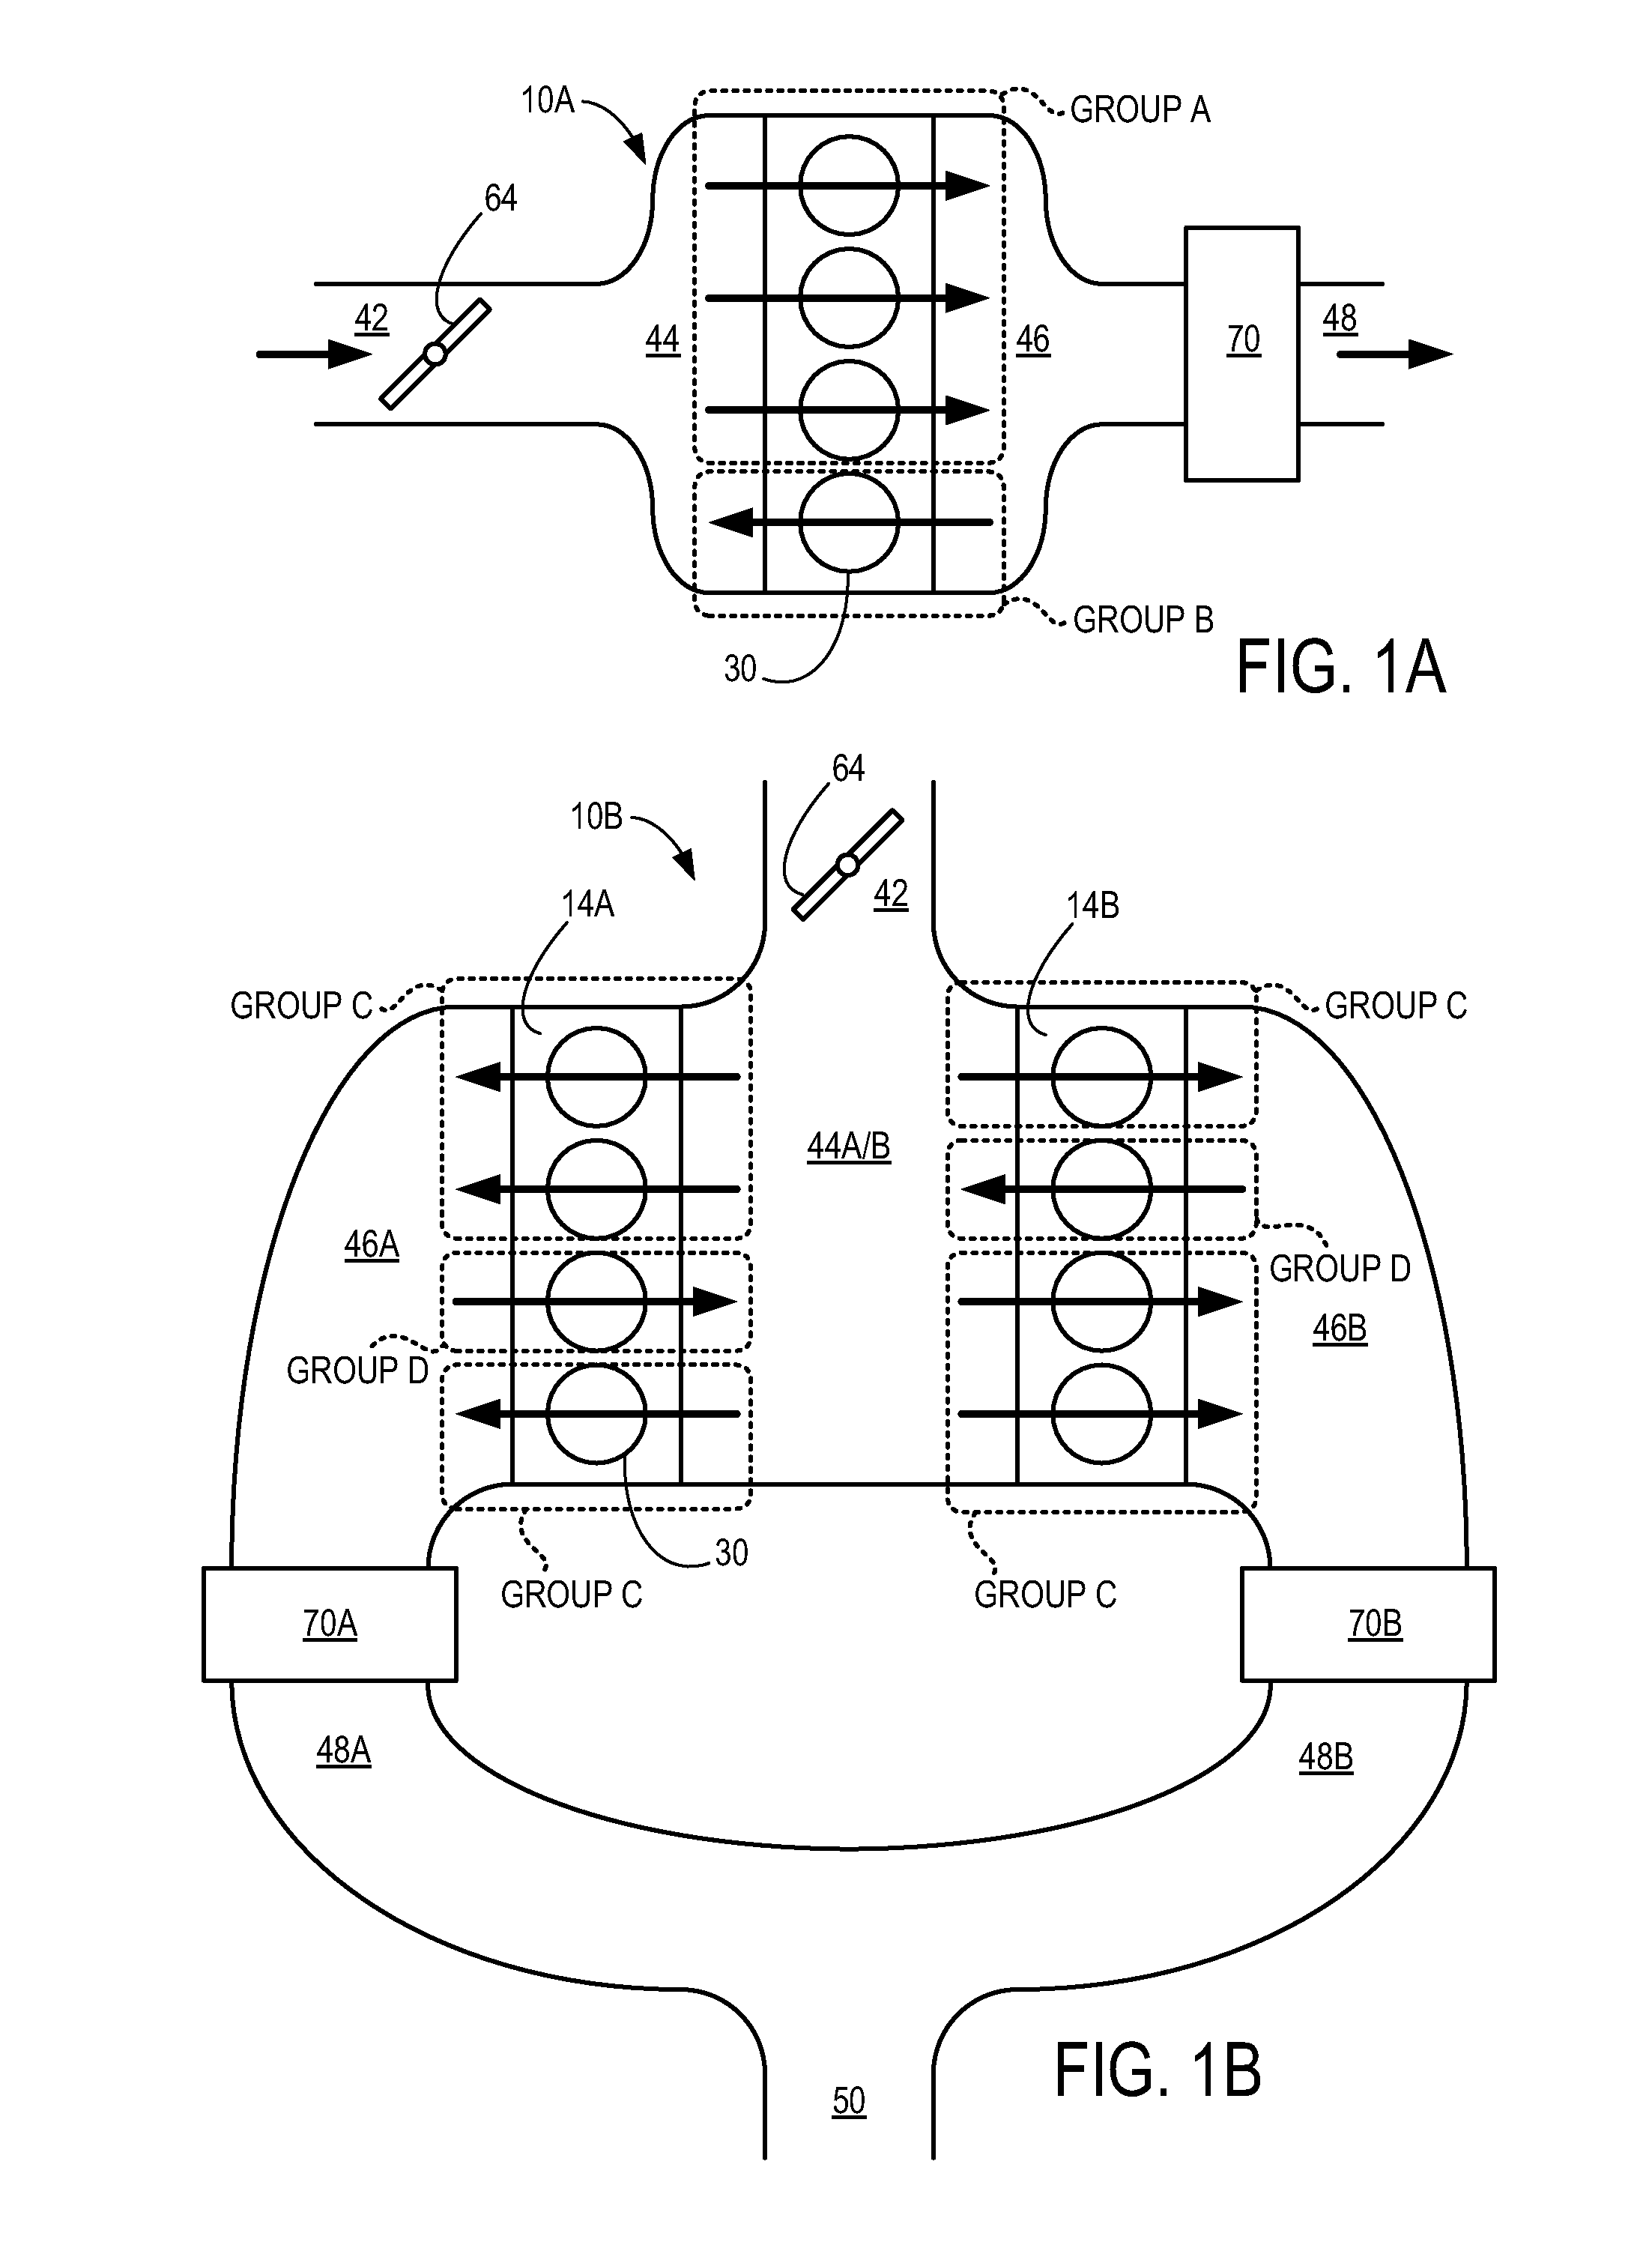 Cylinder Charge Temperature Control for an Internal Combustion Engine